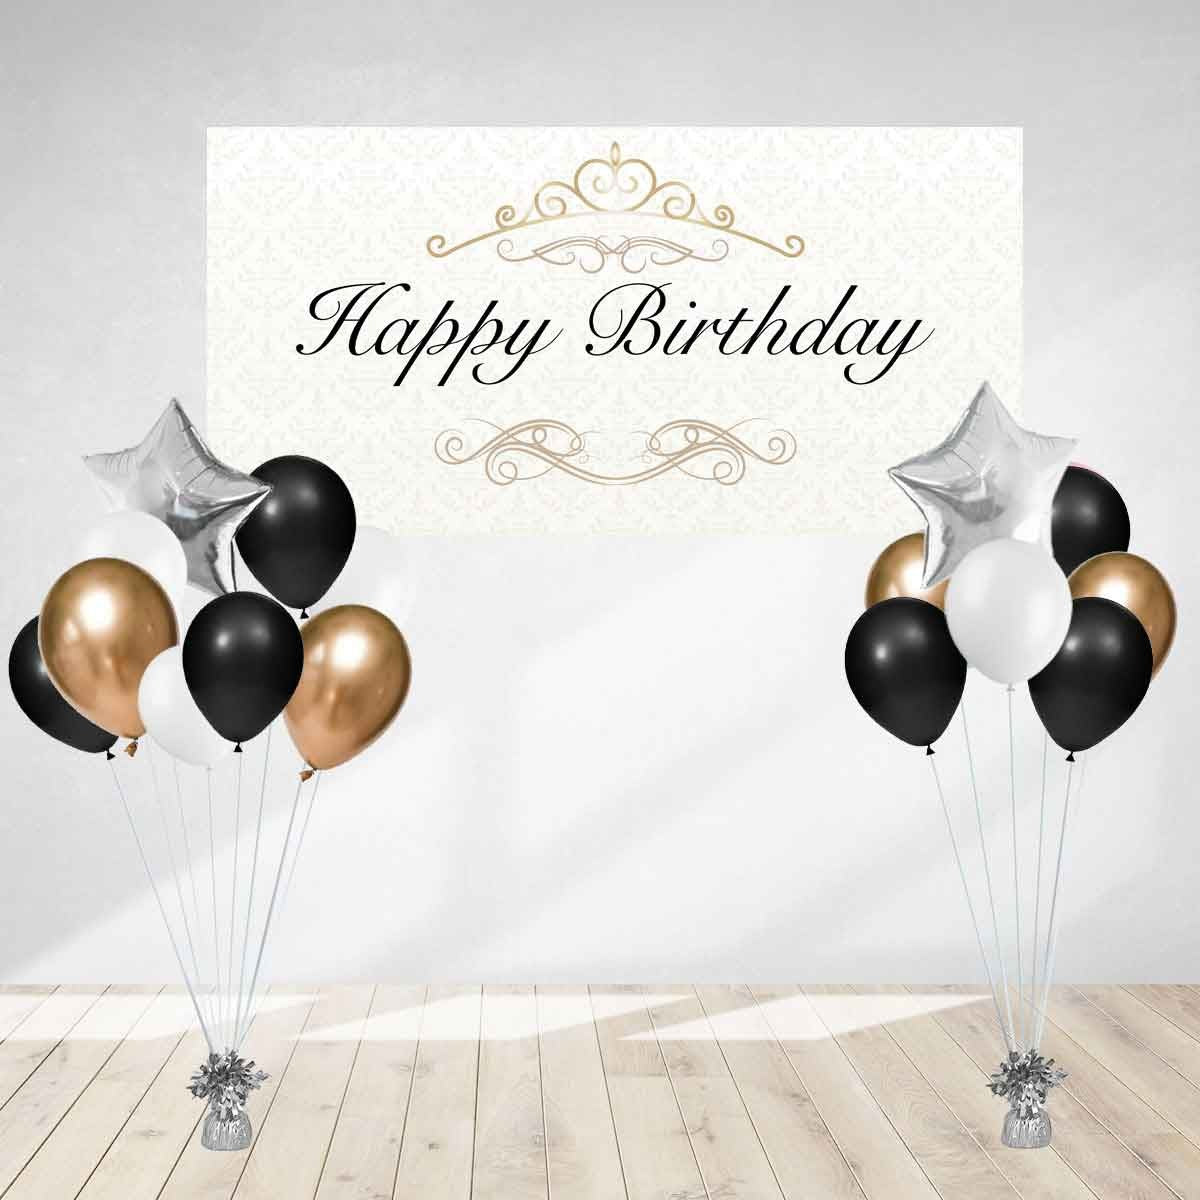 - Poster Banner Measuring 50.8cm x 101.6cm / 20" x 40"  - 2 sets of balloon bouquets with matching colours. Each bouquet include 1 star foil balloon and 6 coloured latex helium balloons.